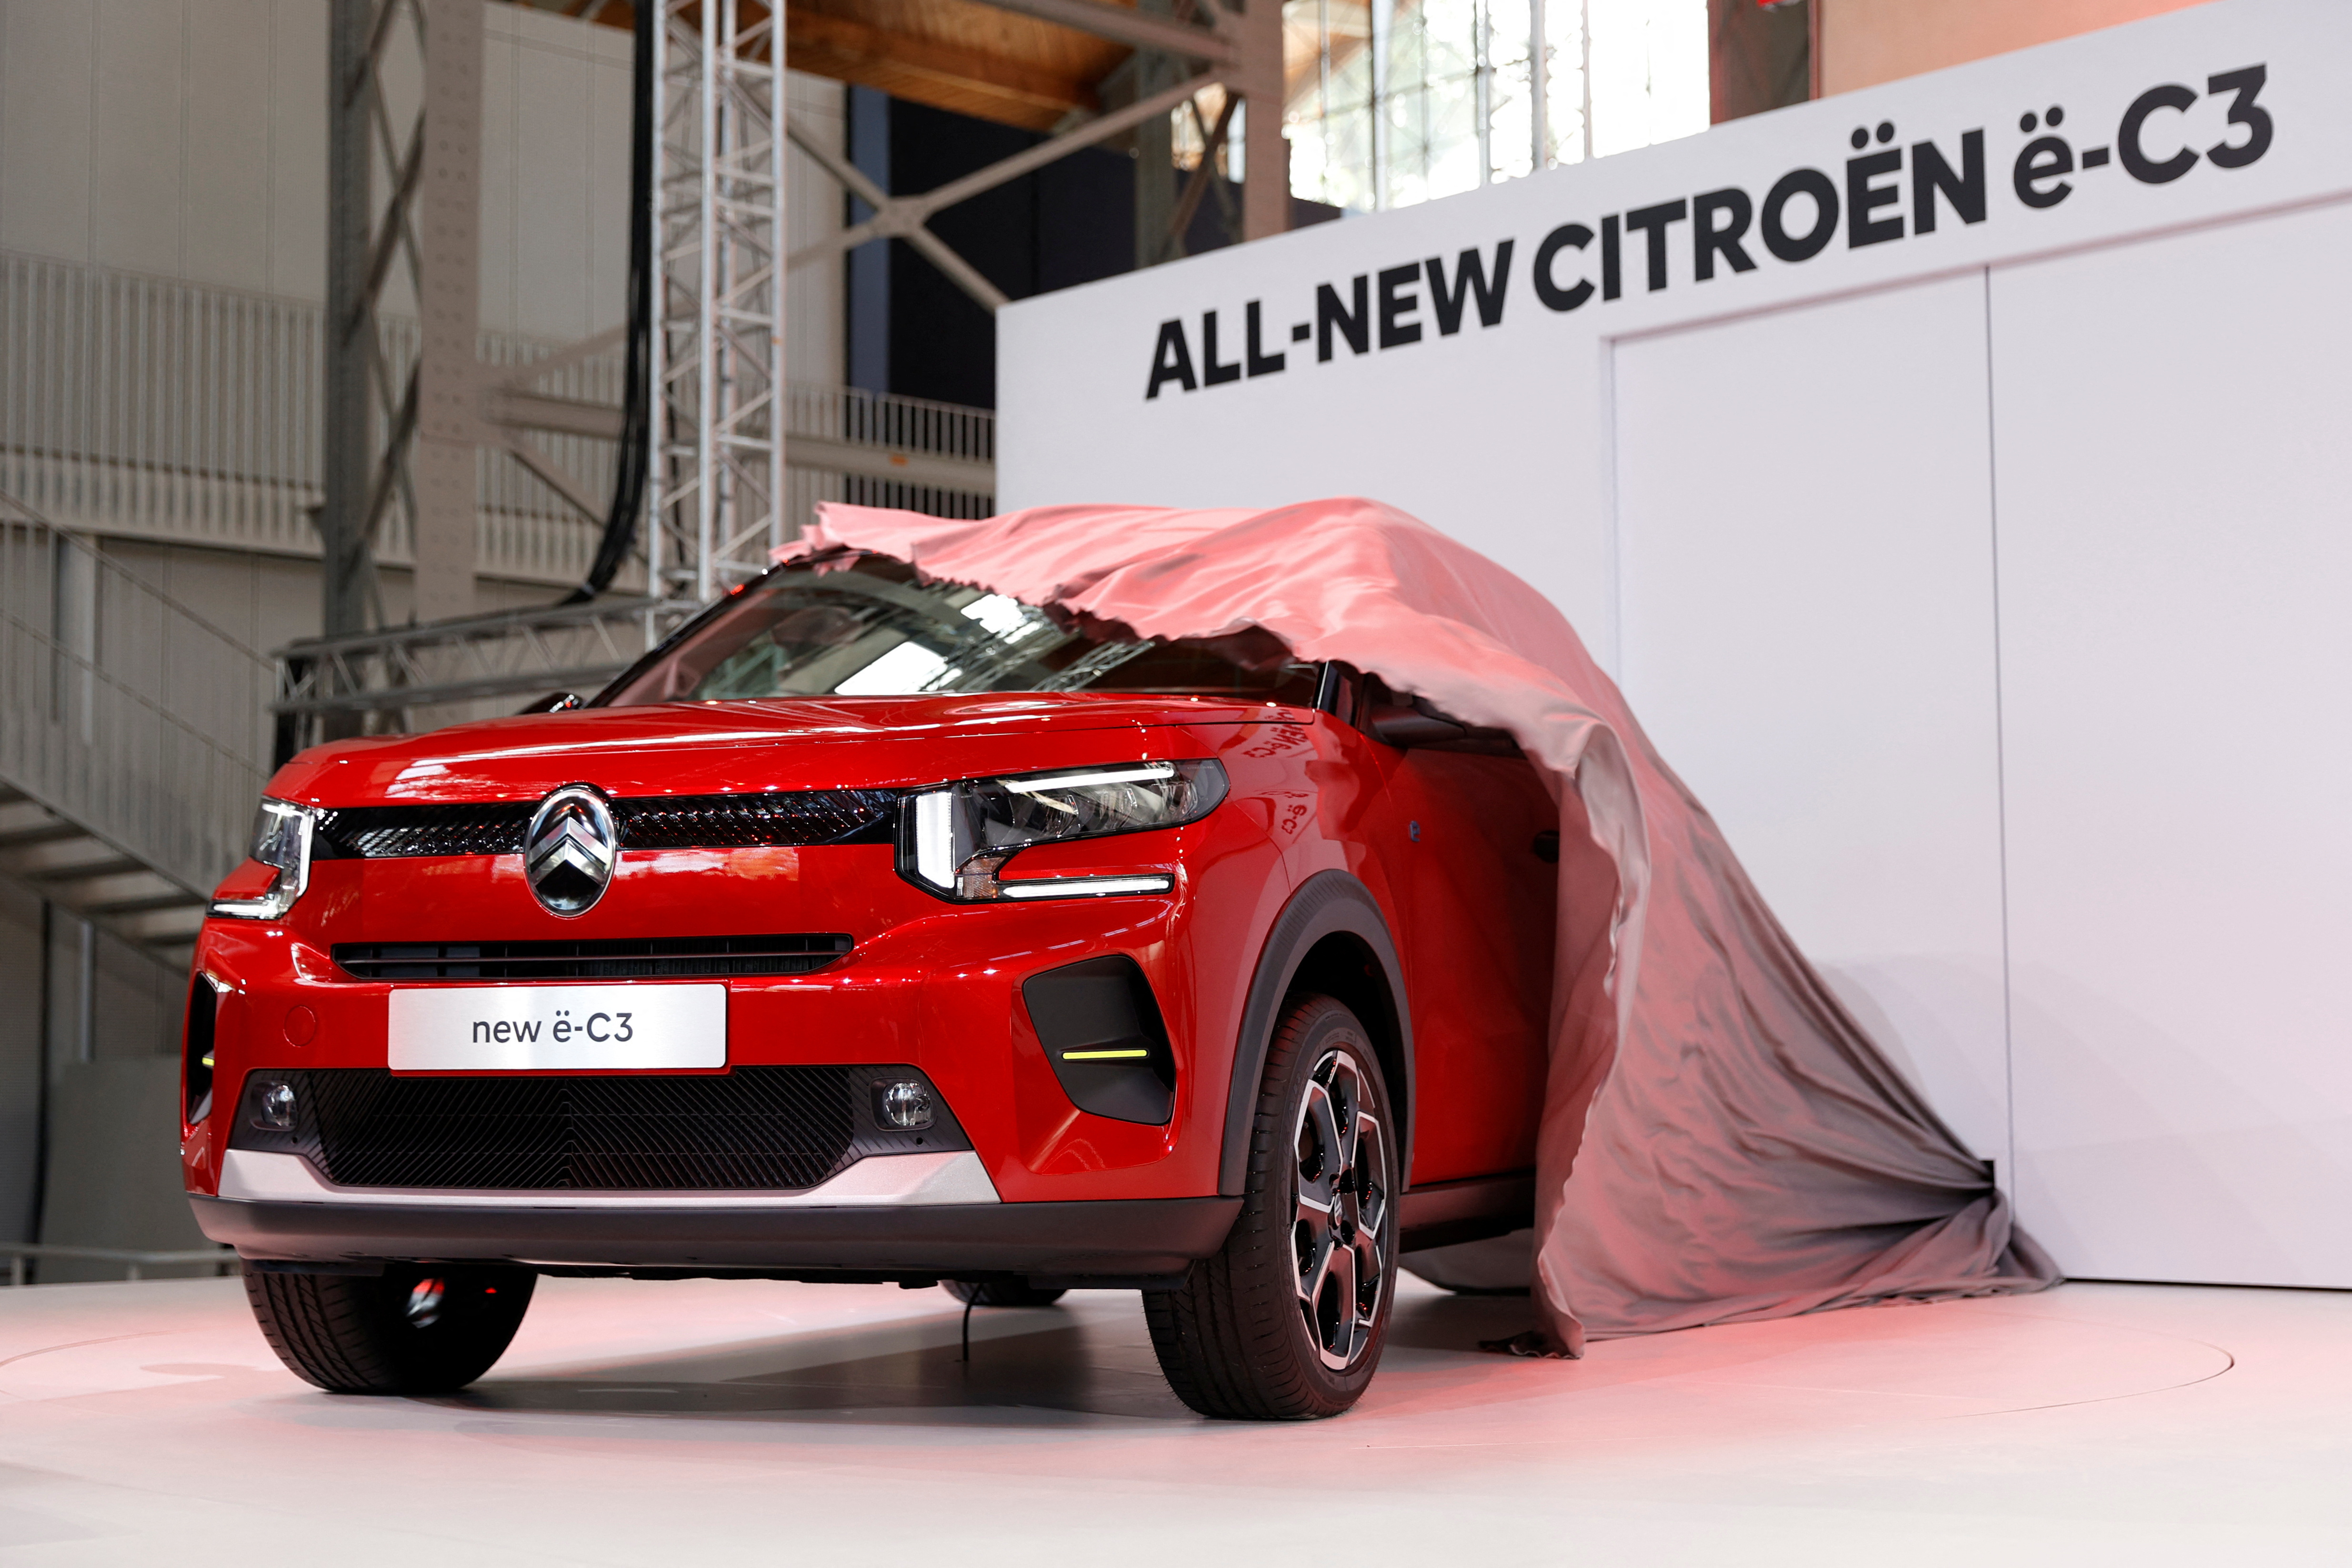 Citroen targets low-cost Chinese EVs with electric C3 for 23,300